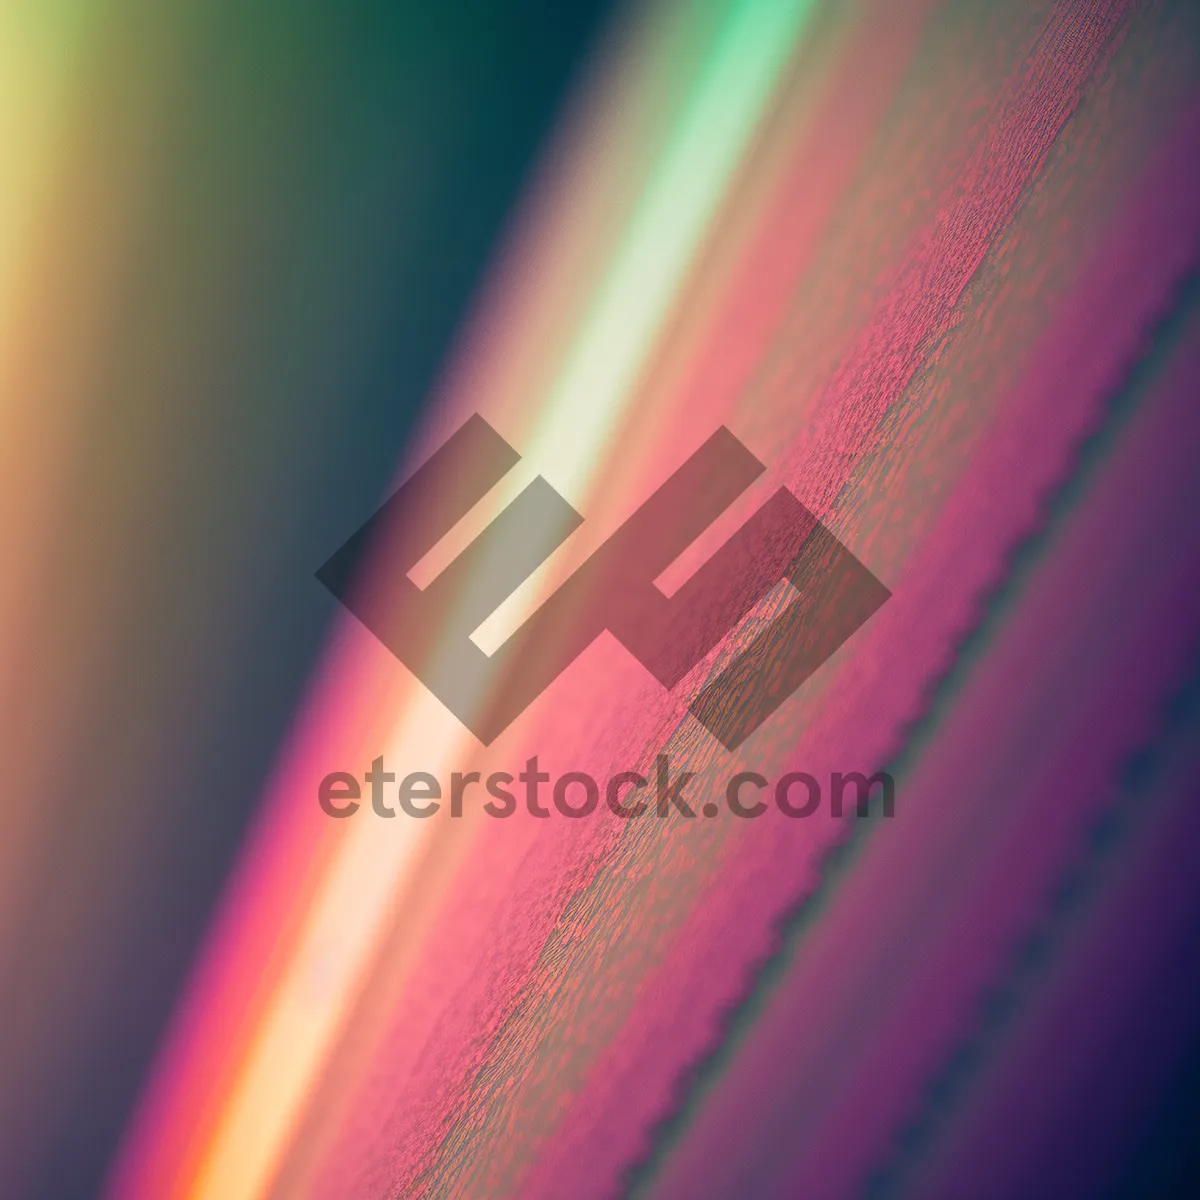 Picture of Vibrant Laser Light Spectrum: Abstract Fractal Energy Flow